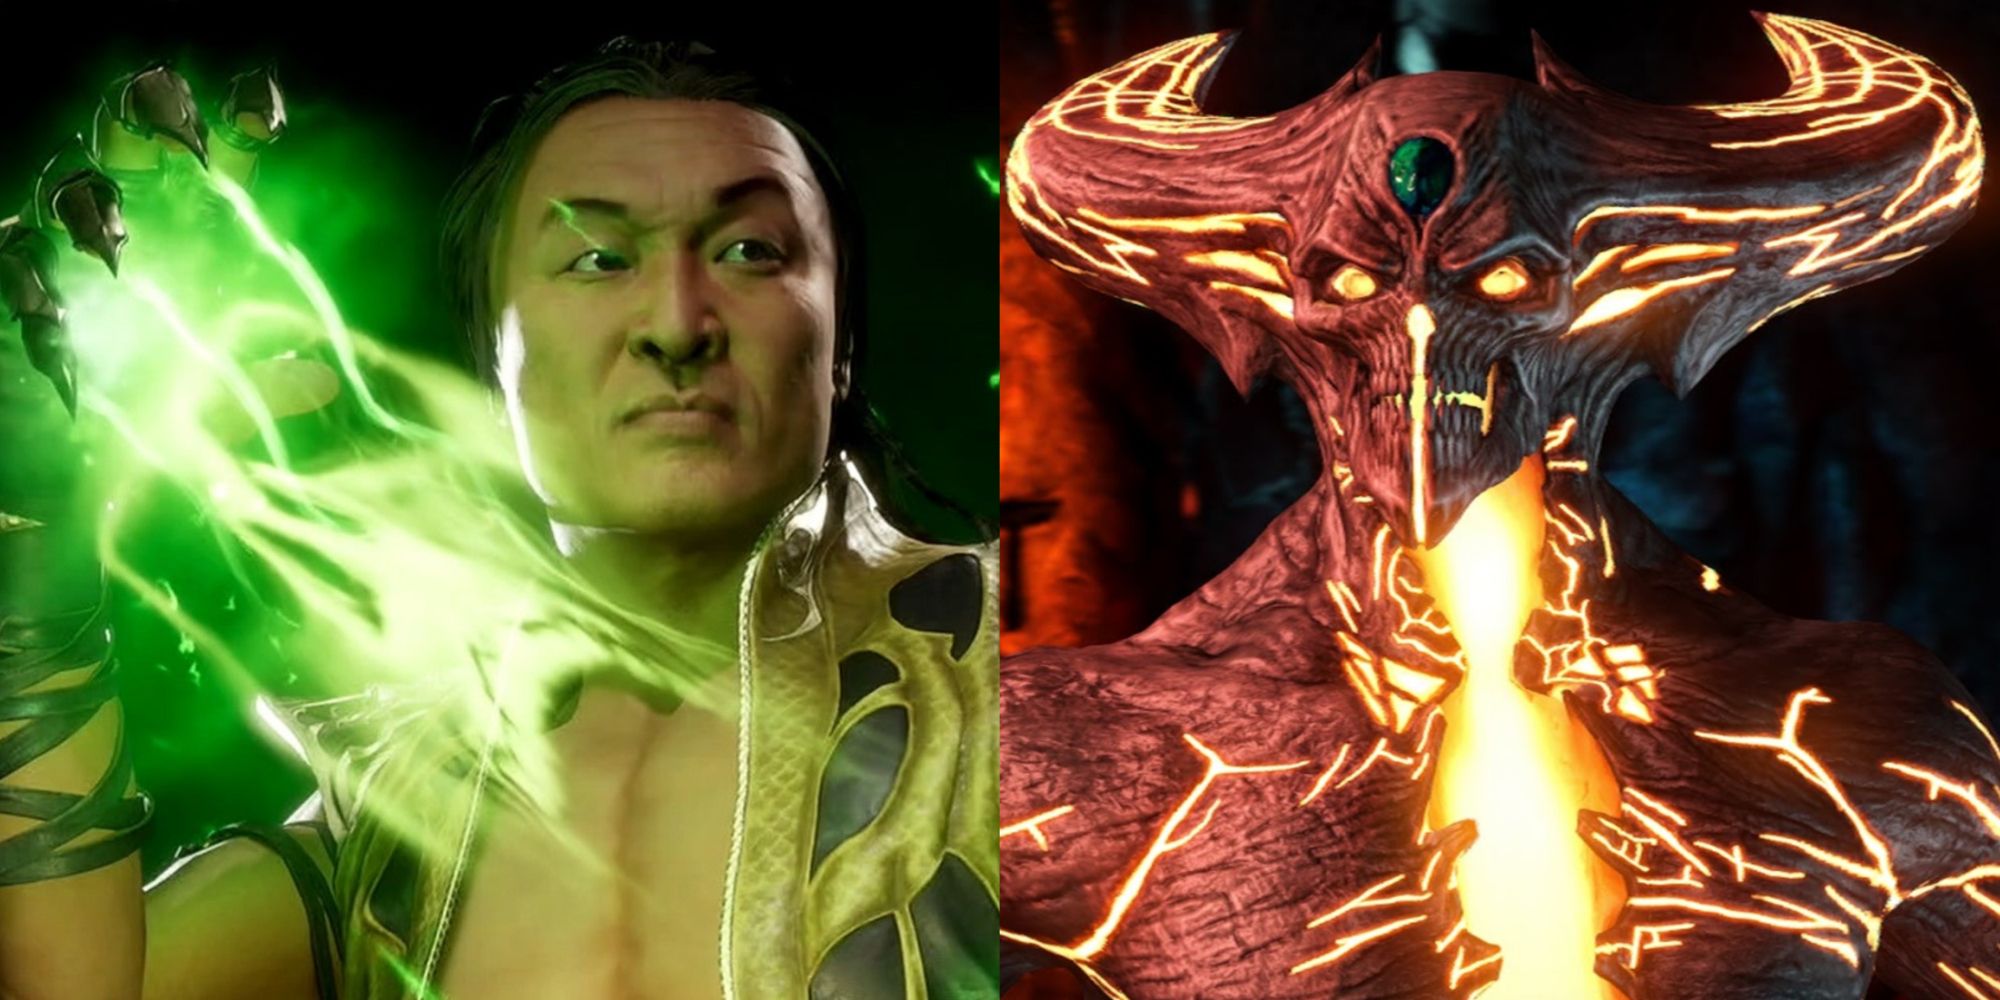 Split image of Shang Tsung and Corrupted Shinnok from the Mortal Kombat franchise